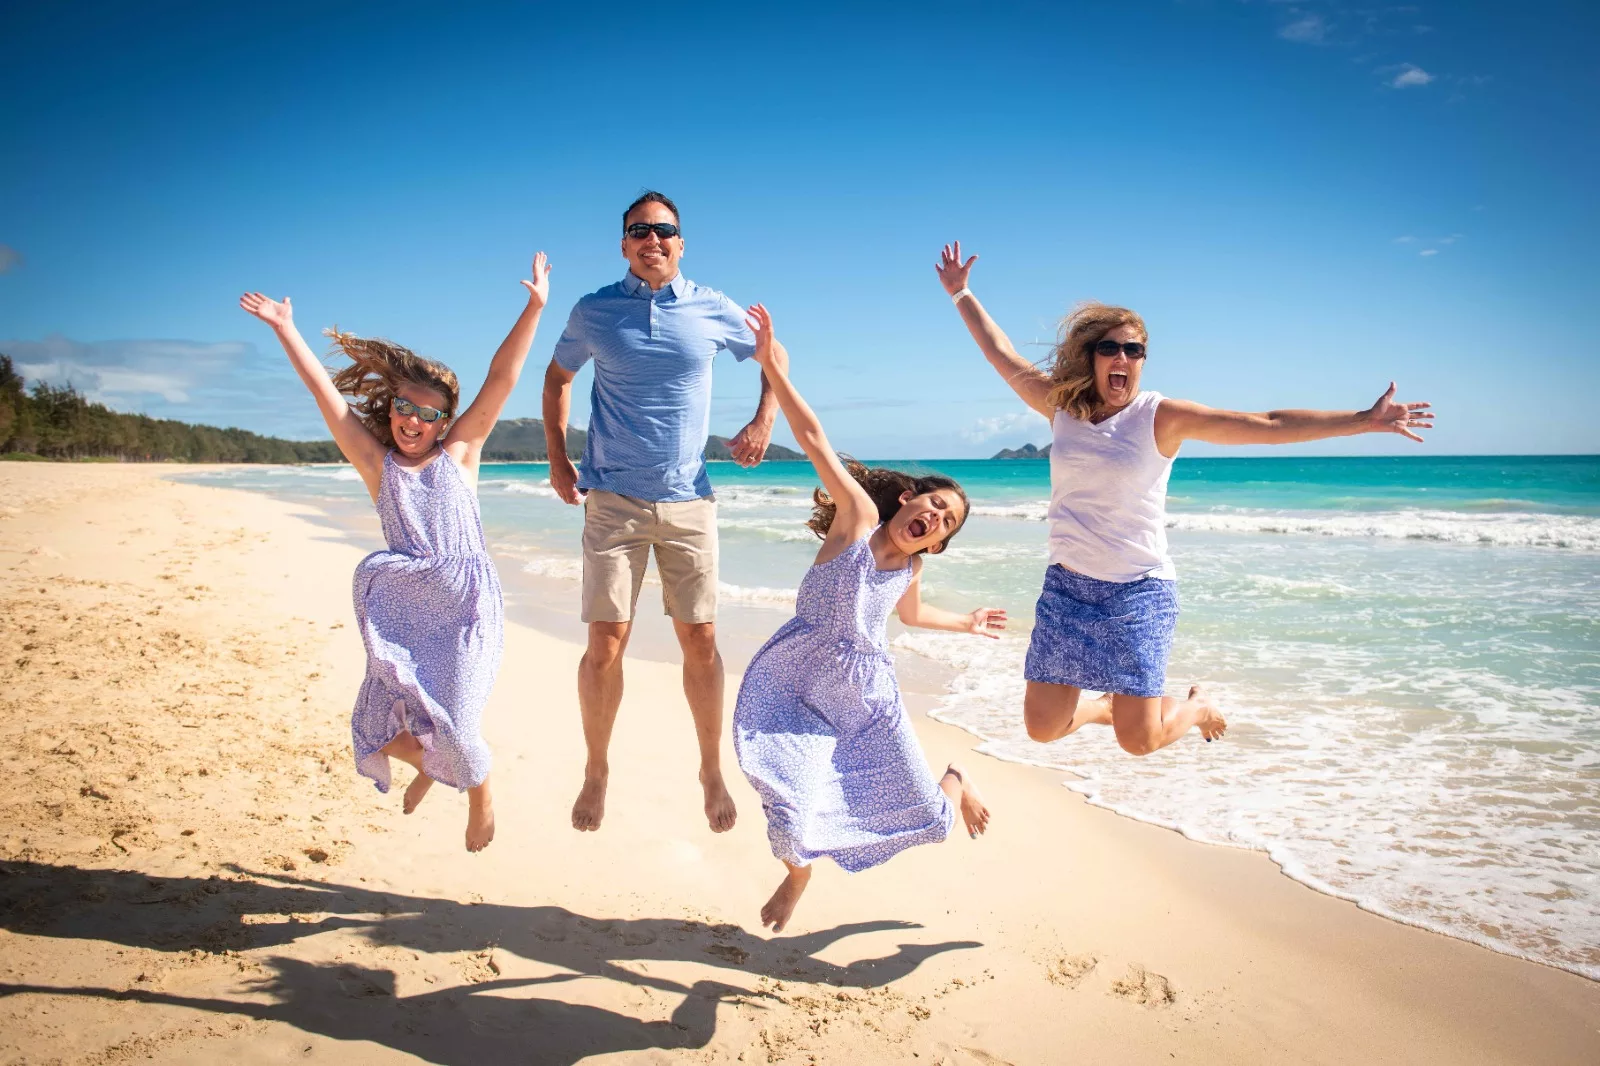 A perfect family photoshoot at a beach by oahu hawaii photography